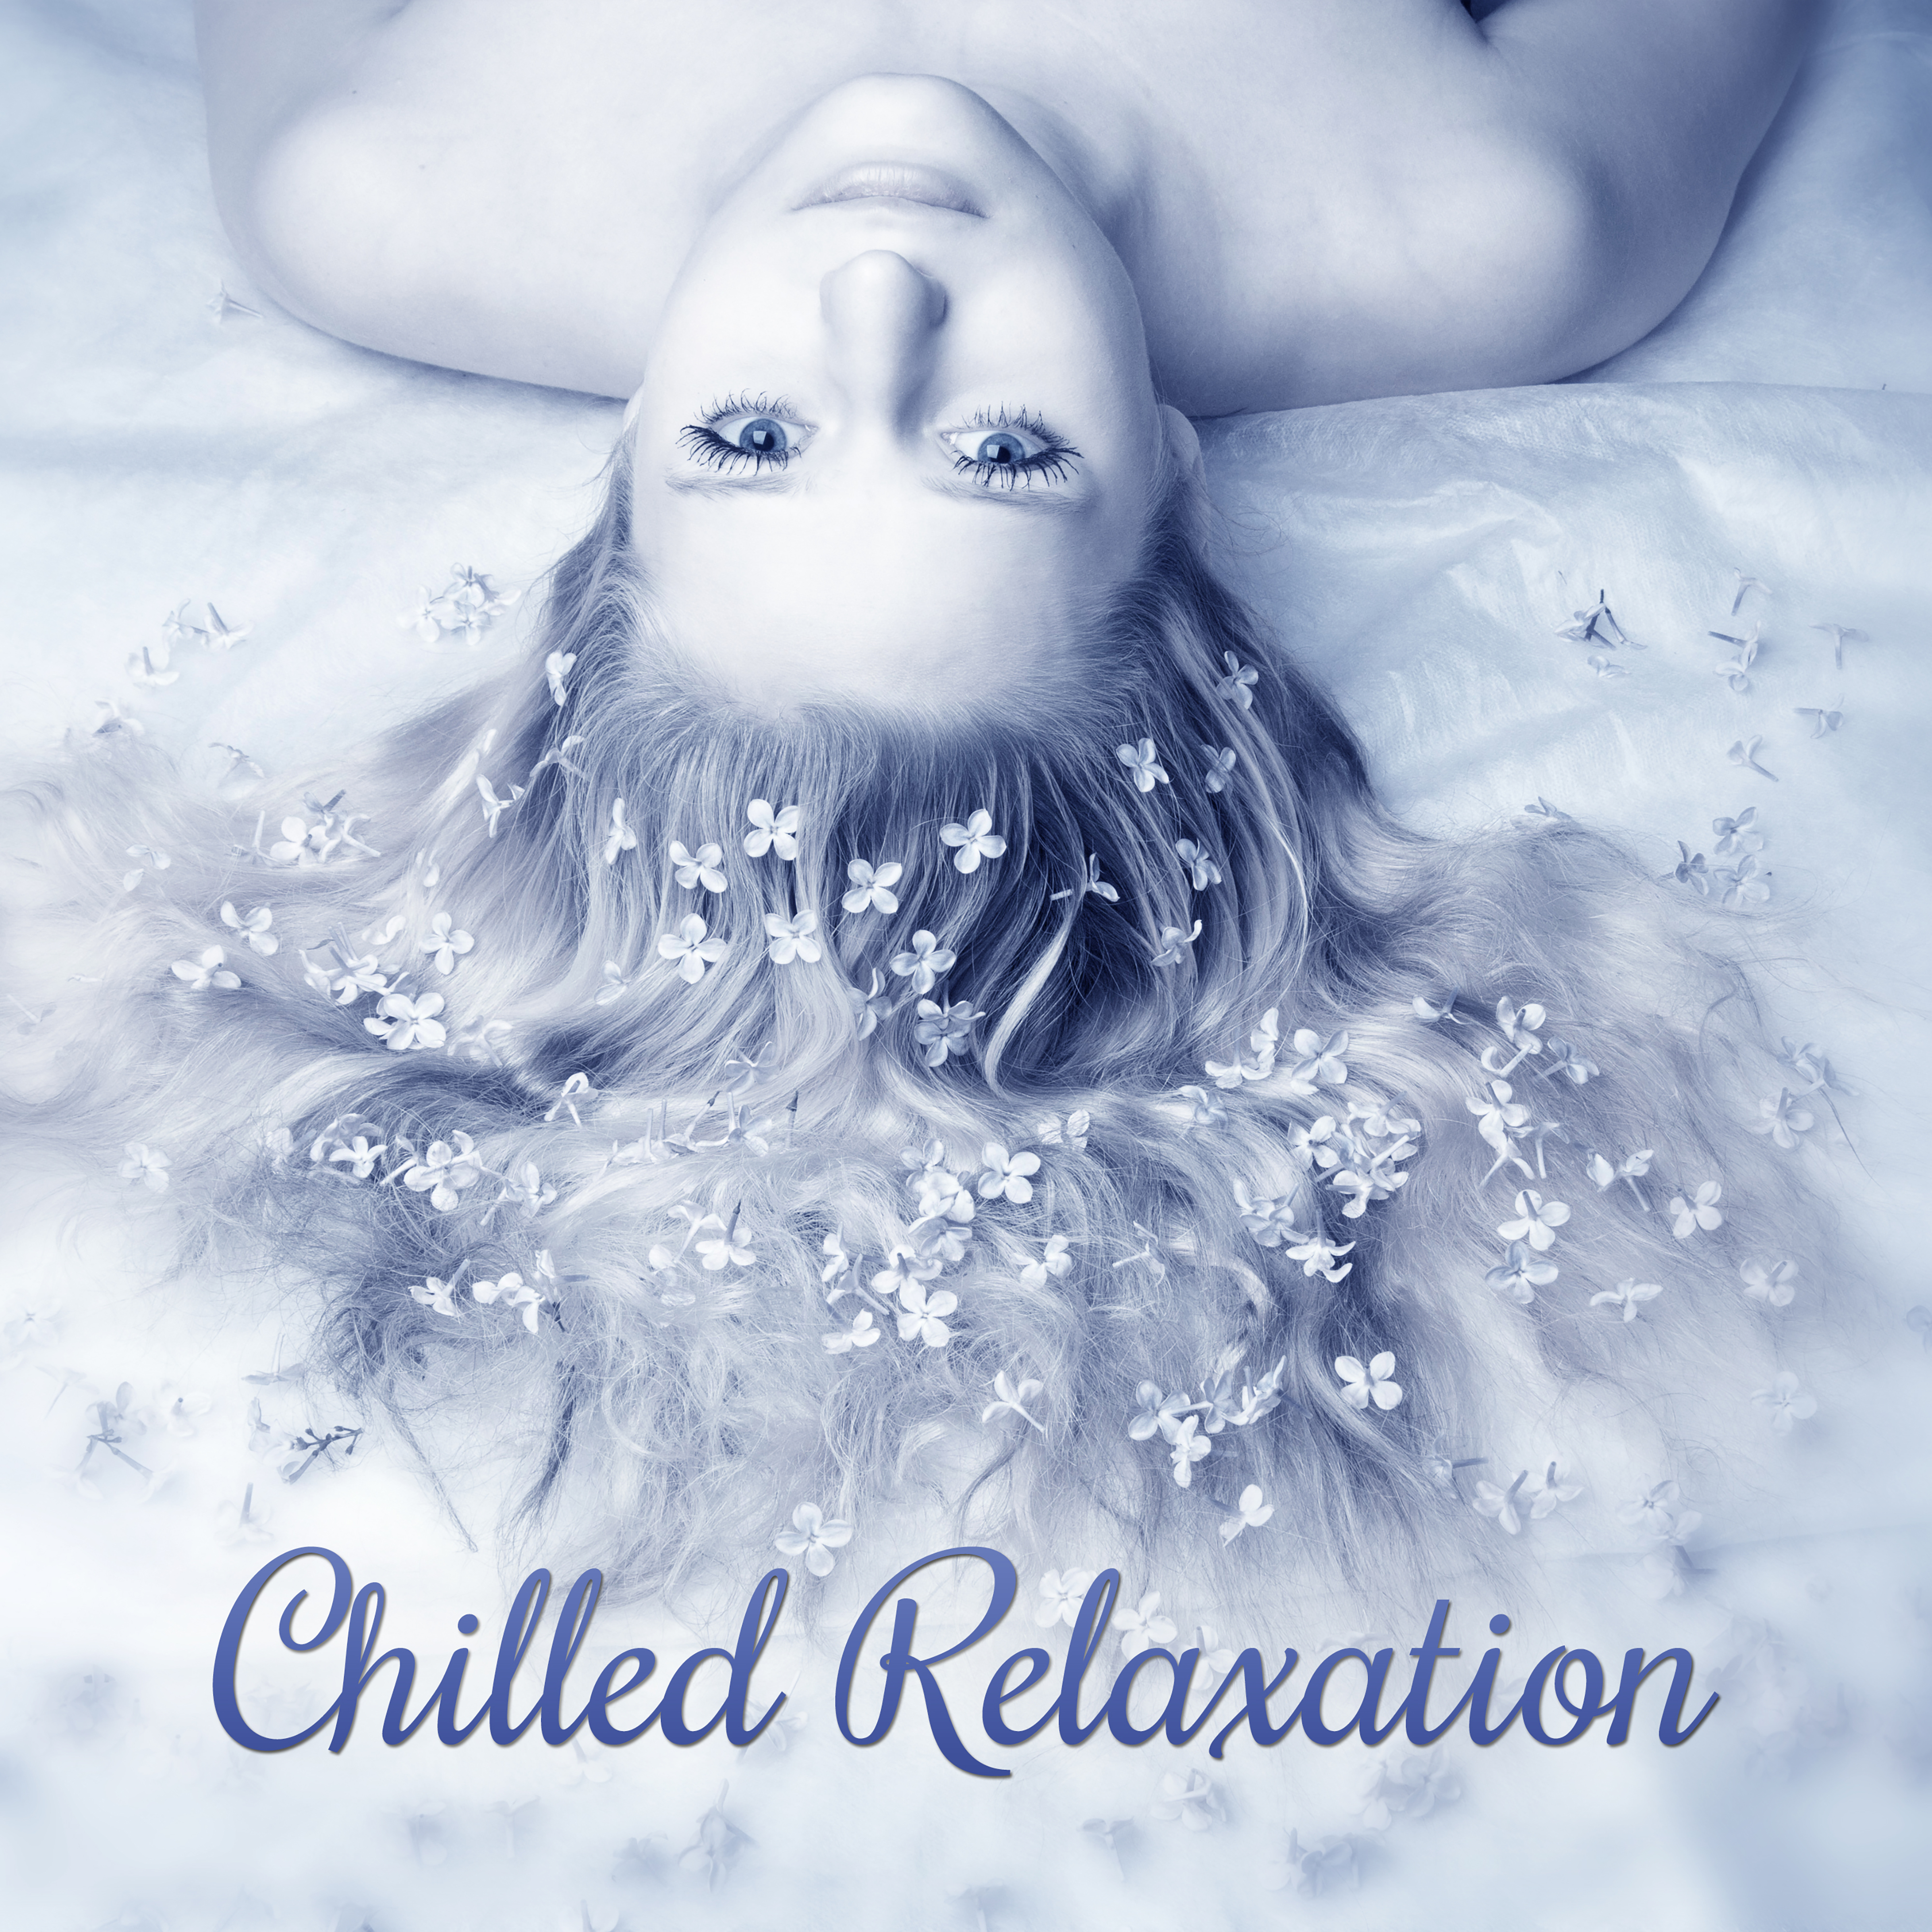 Chilled Relaxation  New Age Music, Full of Nature Sounds, Relaxing Music, Spa, Massage Background Music